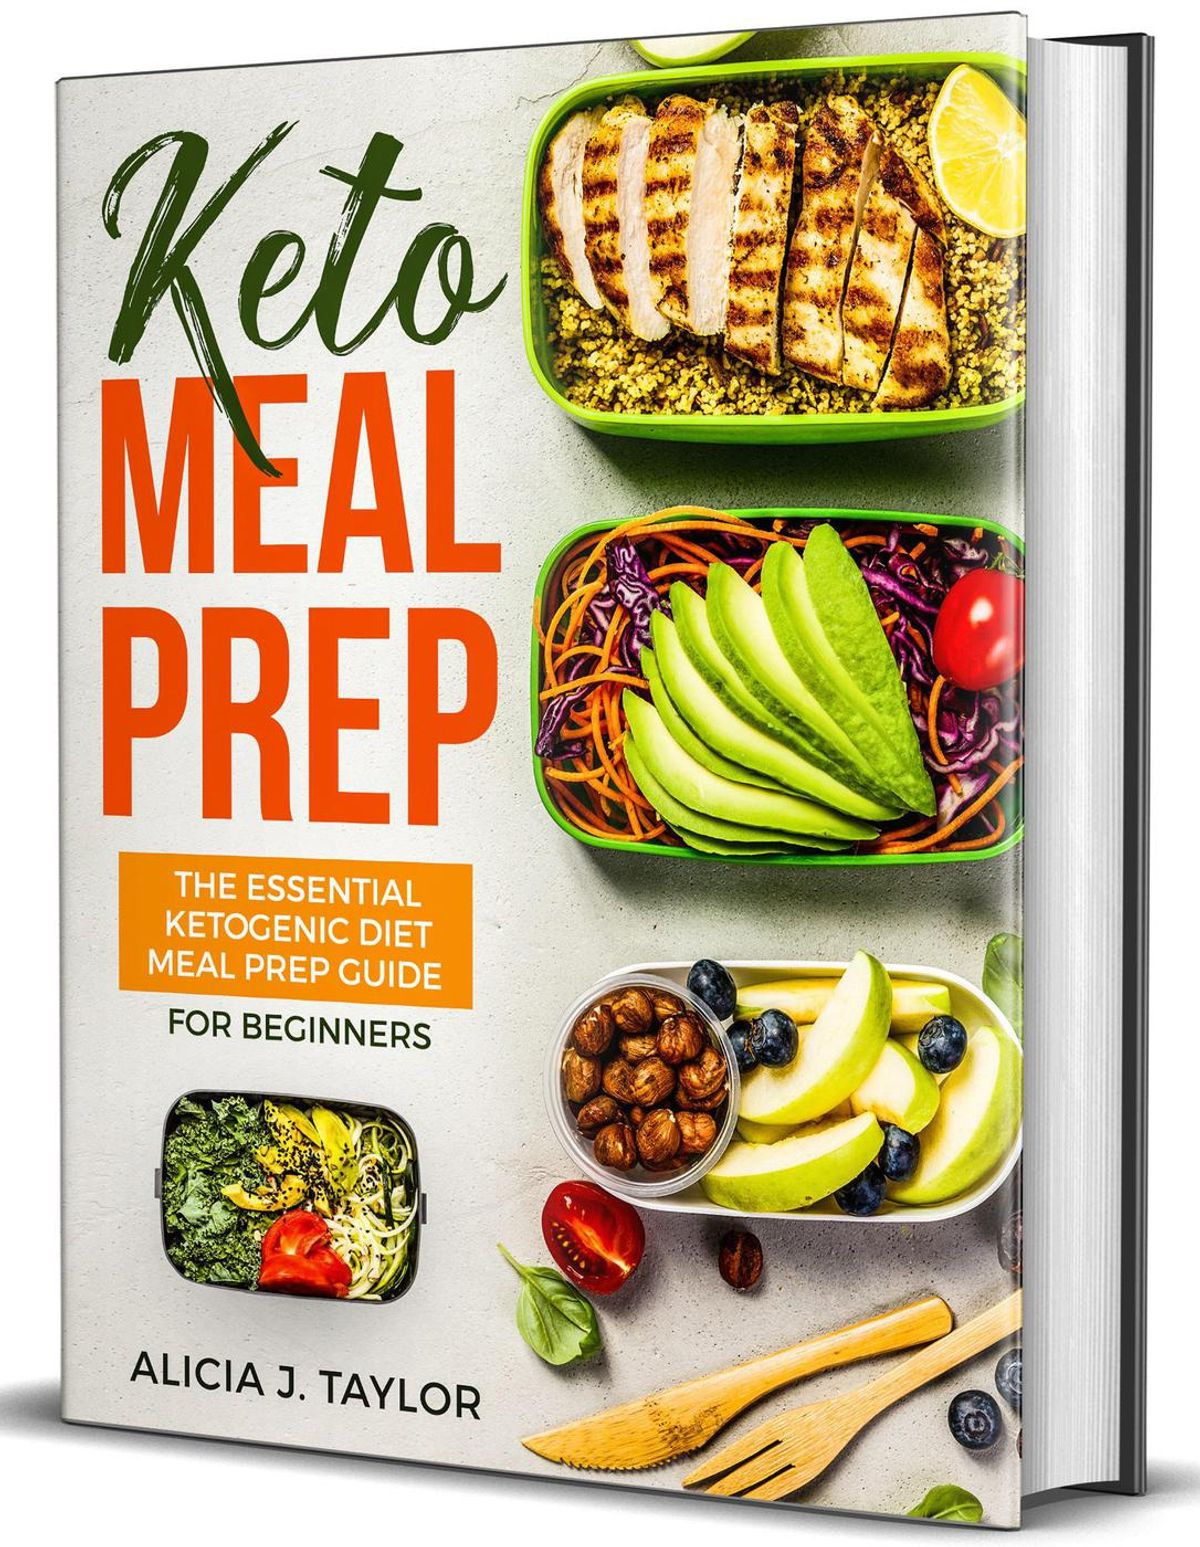 Keto Diet Meal Prep For Beginners
 Keto Meal Prep the essential Ketogenic Meal prep Guide